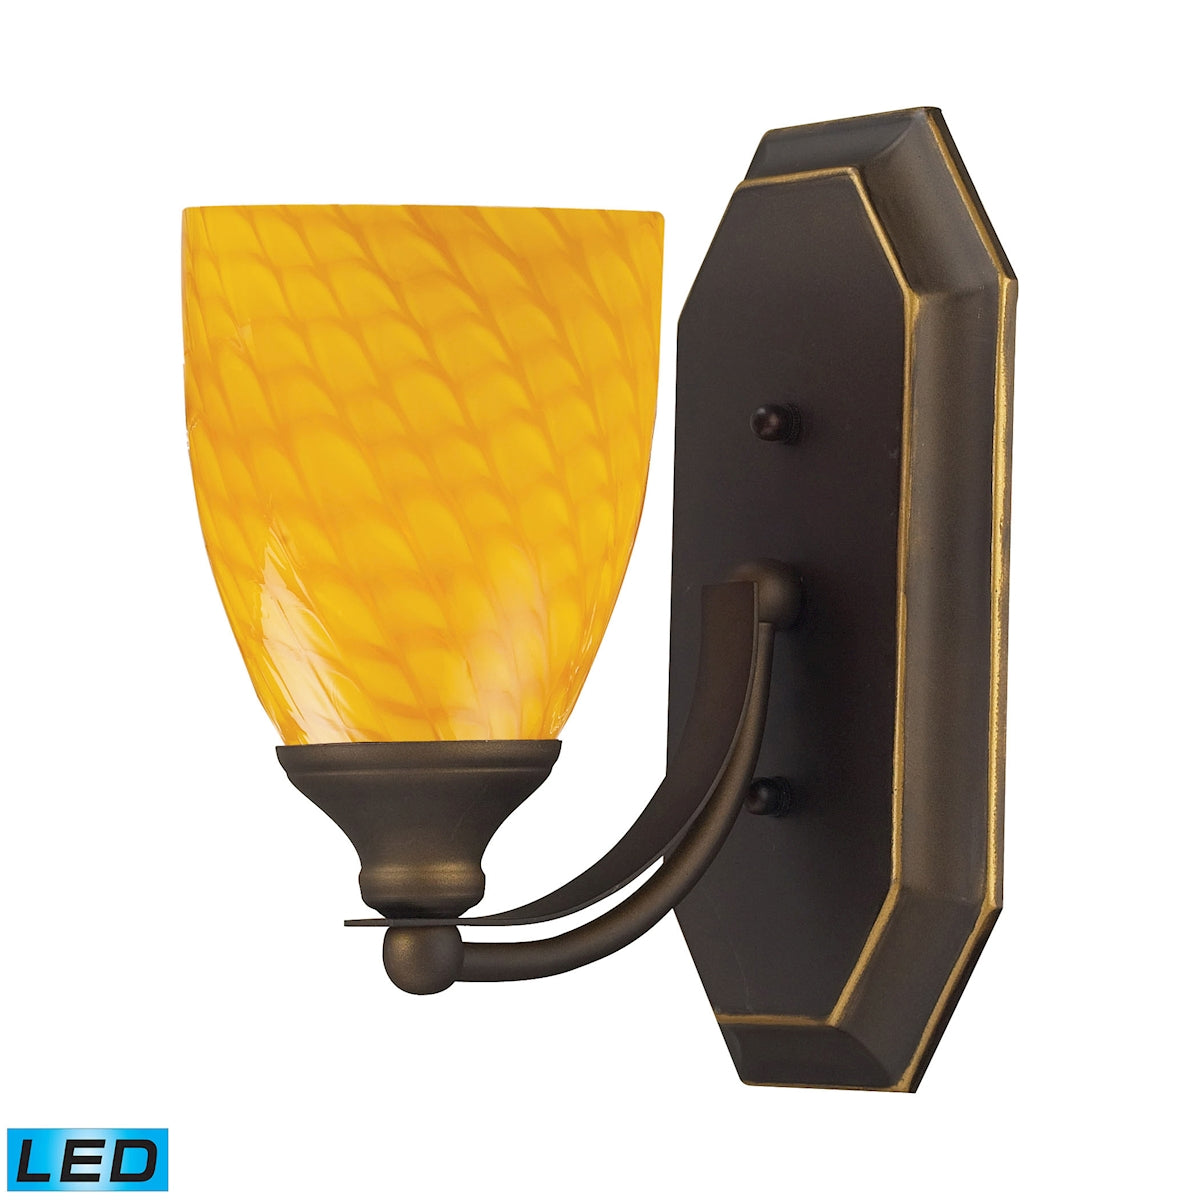 ELK Lighting 570-1B-CN-LED Mix-N-Match Vanity 1-Light Wall Lamp in Aged Bronze with Canary Glass - Includes LED Bulb